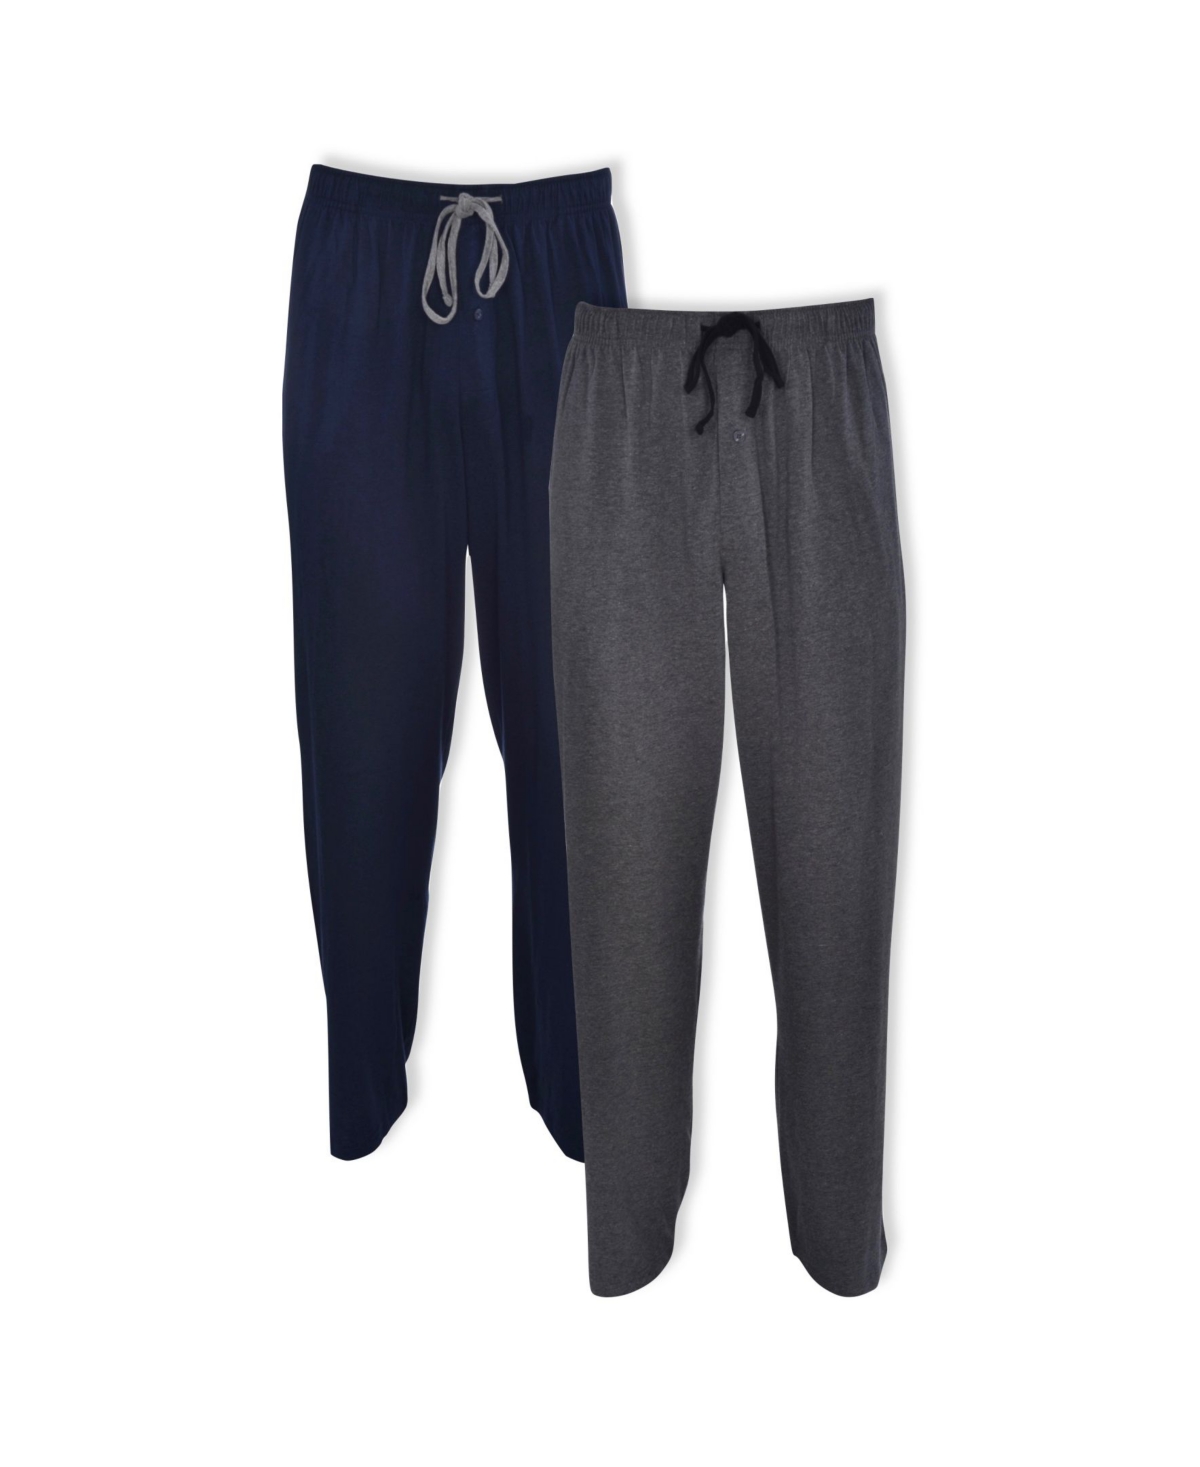 Men's Big and Tall Knit Sleep Pants, Pack of 2 - Navy, Charcoal